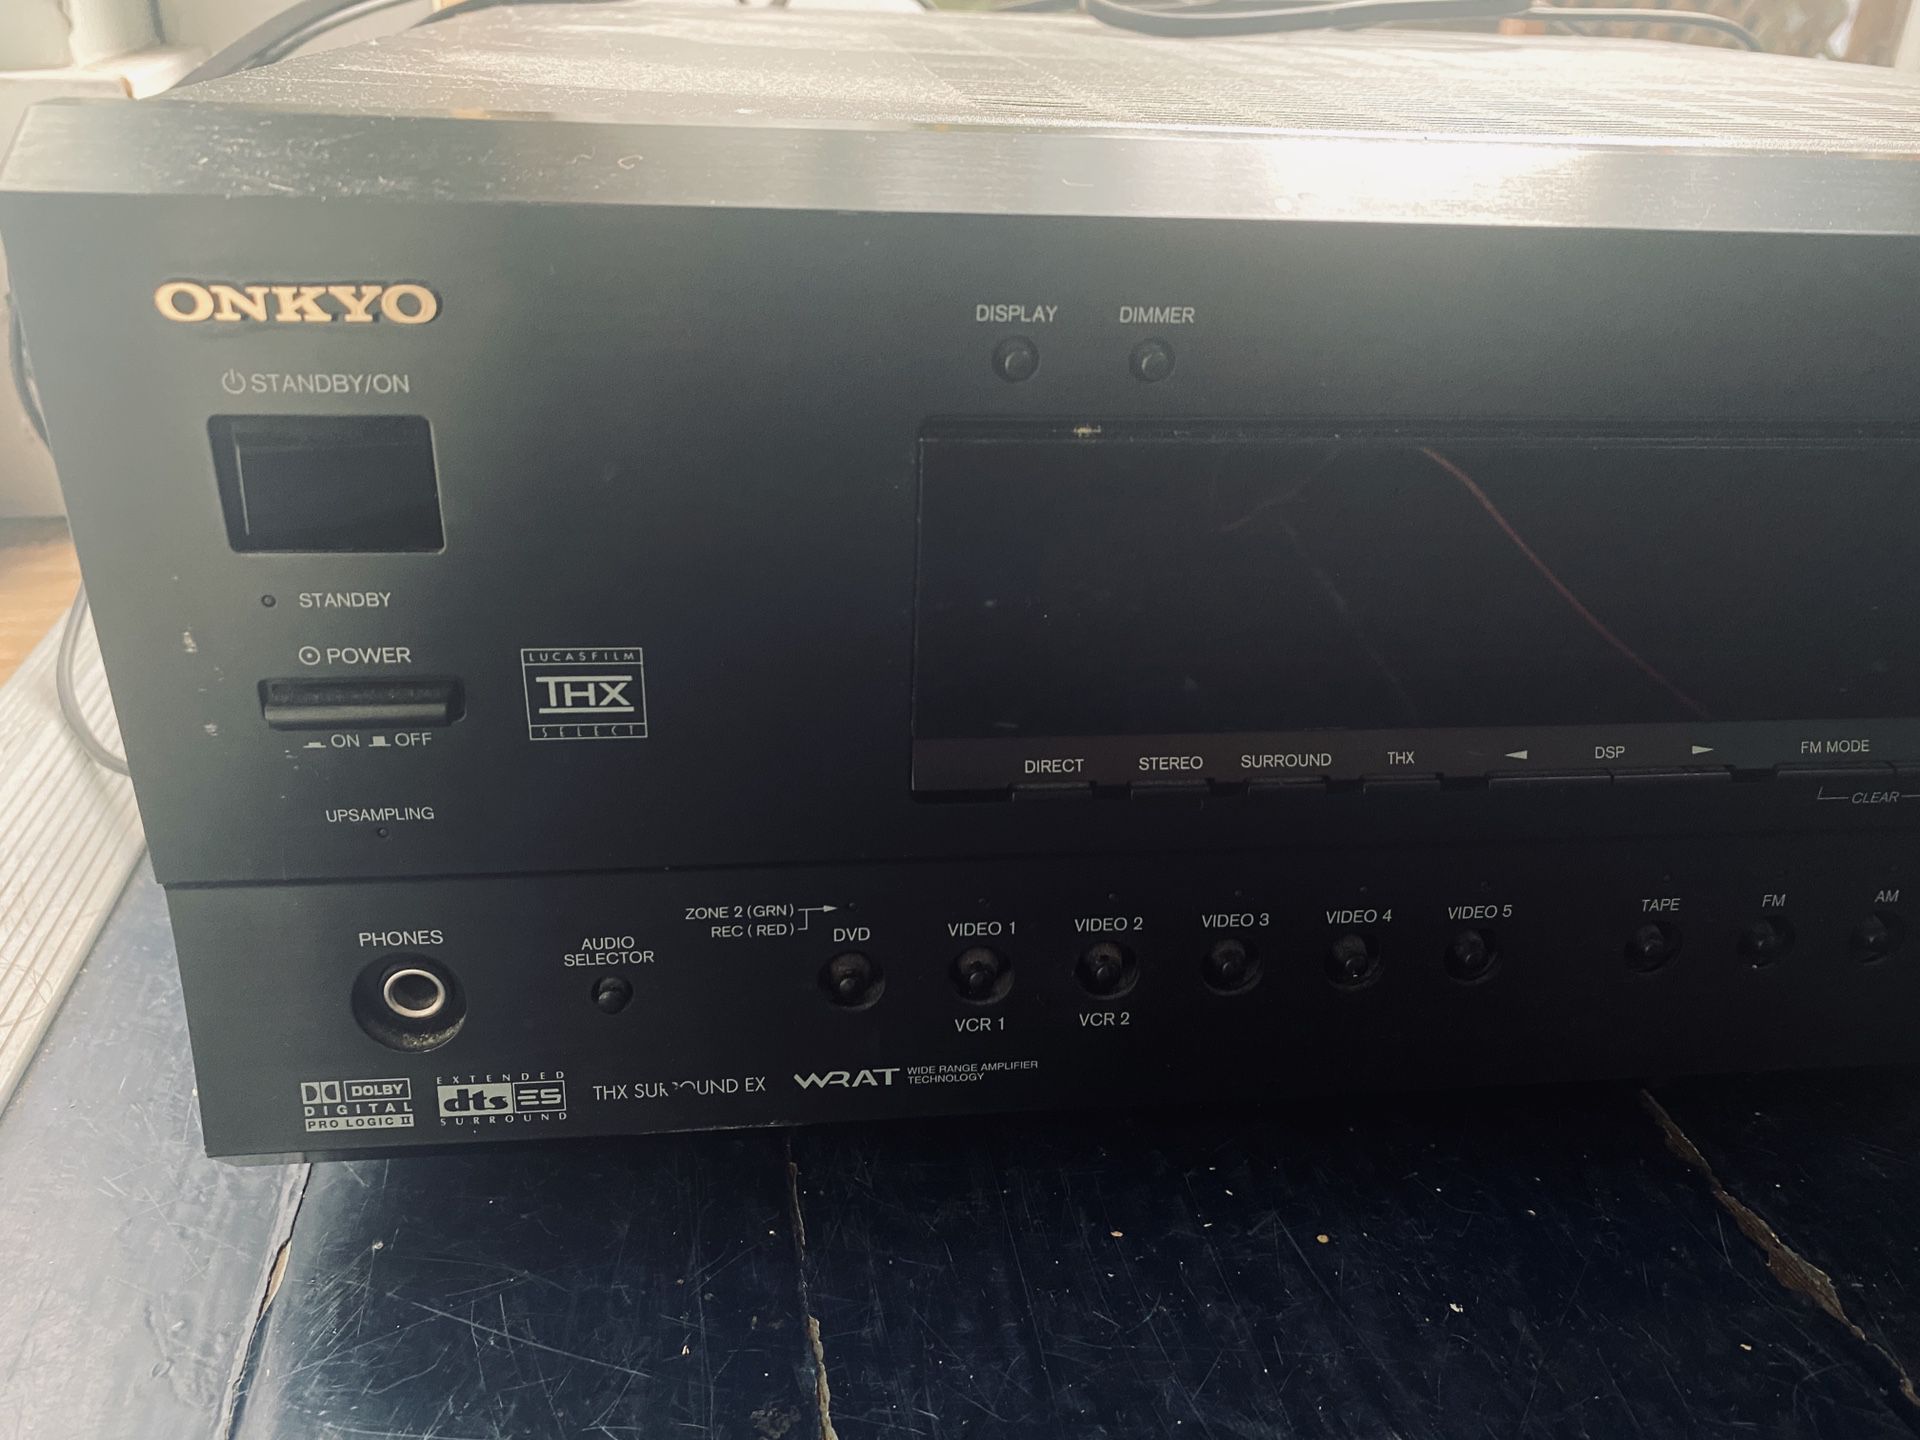 Onkyo receiver, in need of some repair